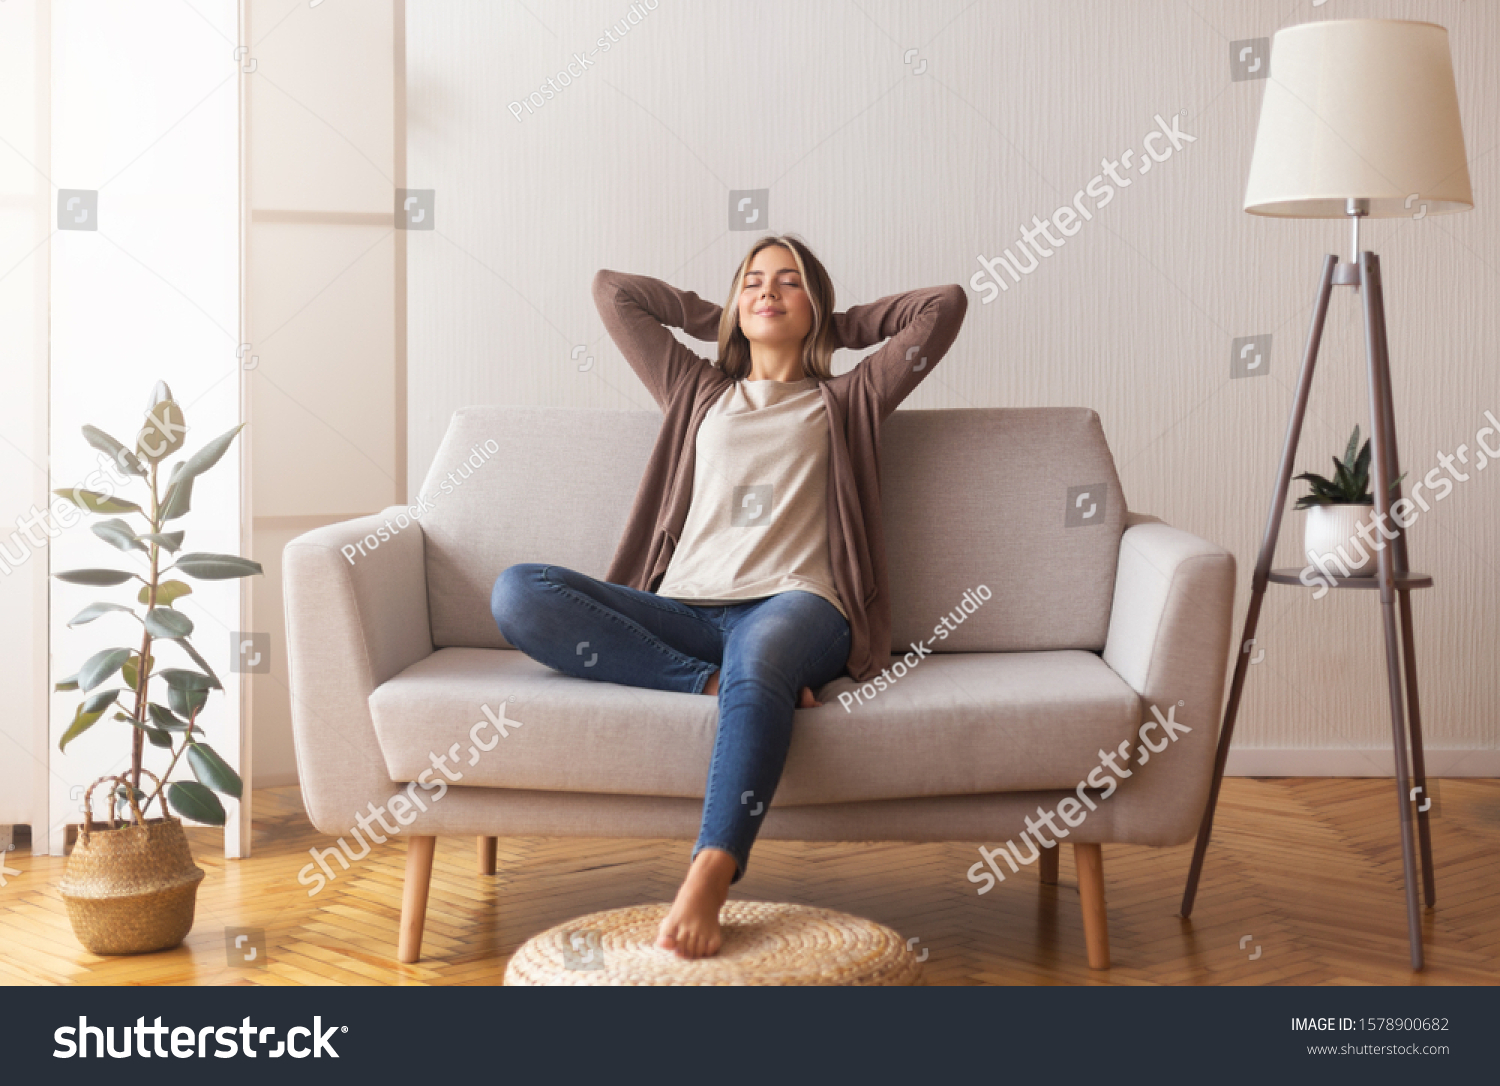 Finally weekends. Millennial girl relaxing at home on couch, enjoying free time, empty space #1578900682